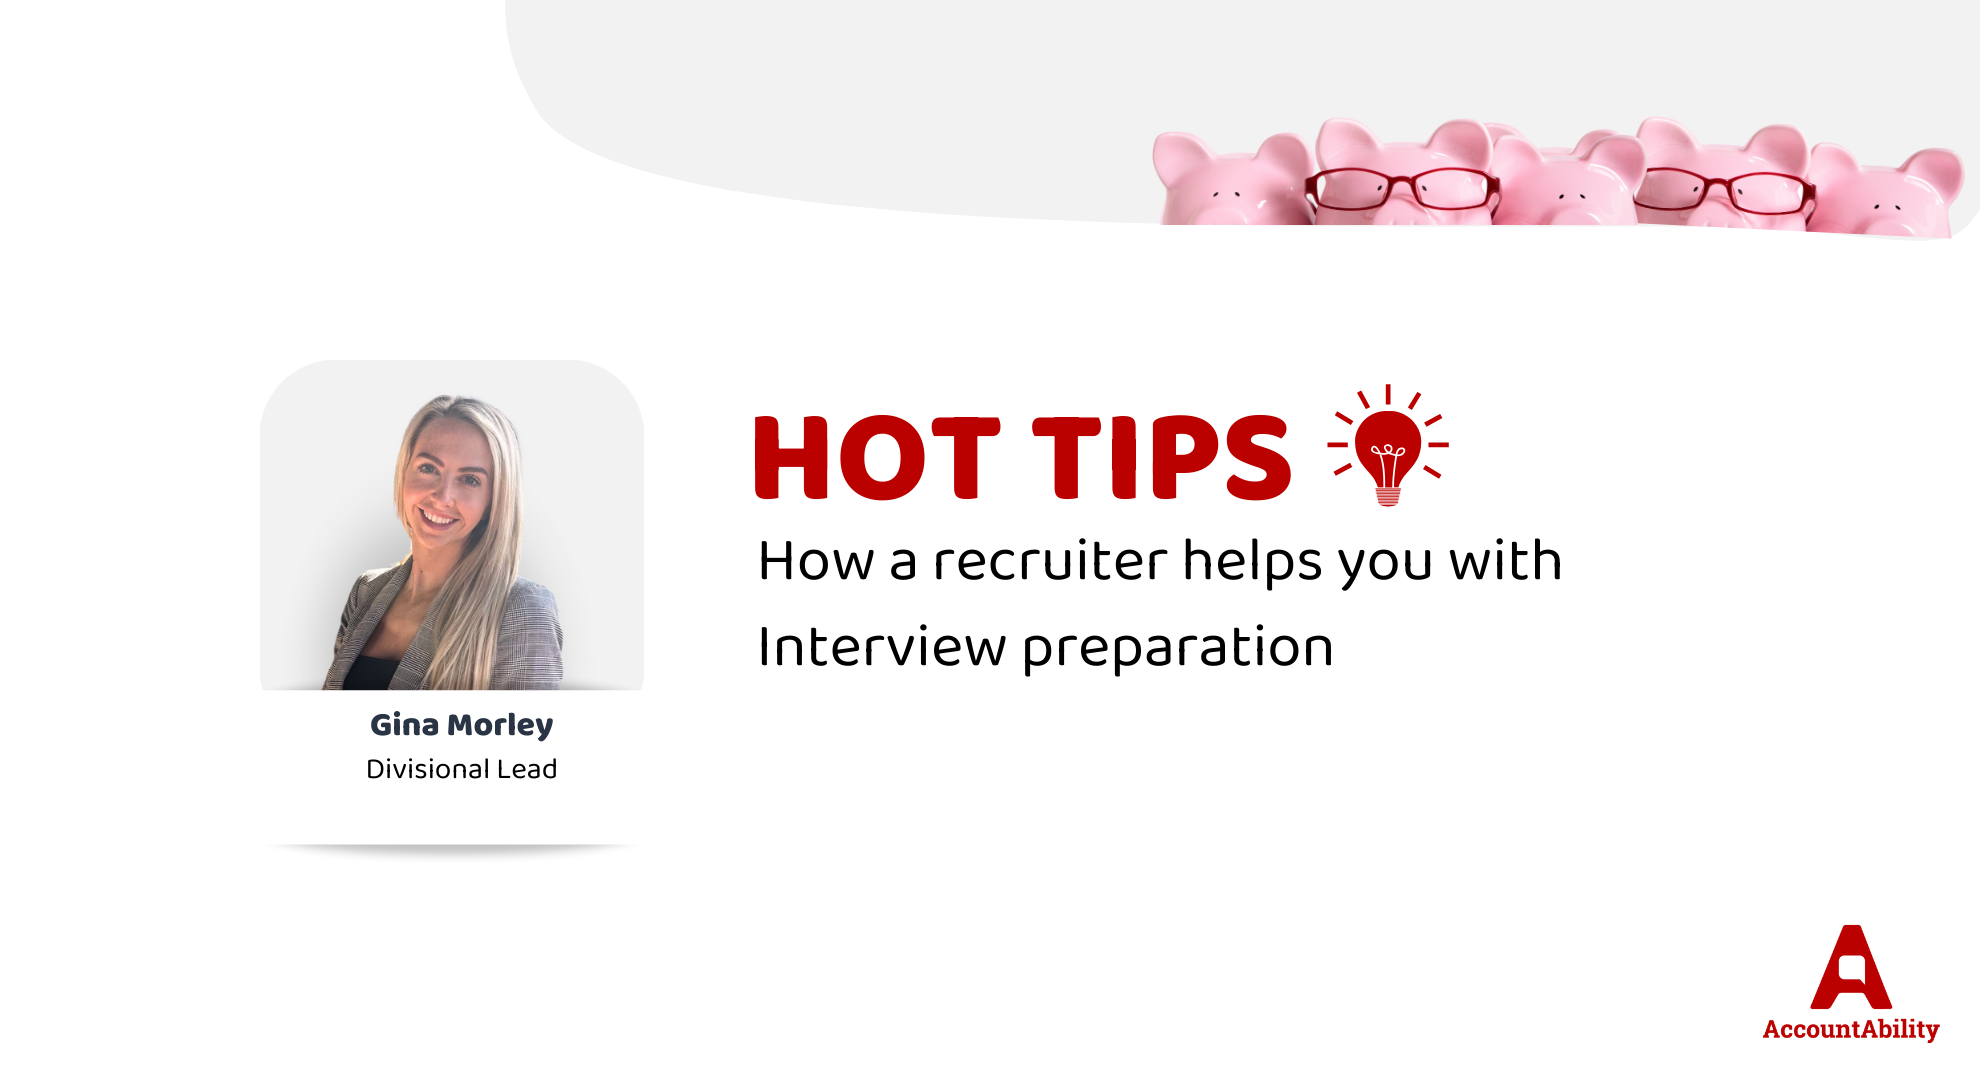 How a recruiter helps you with interview preparation